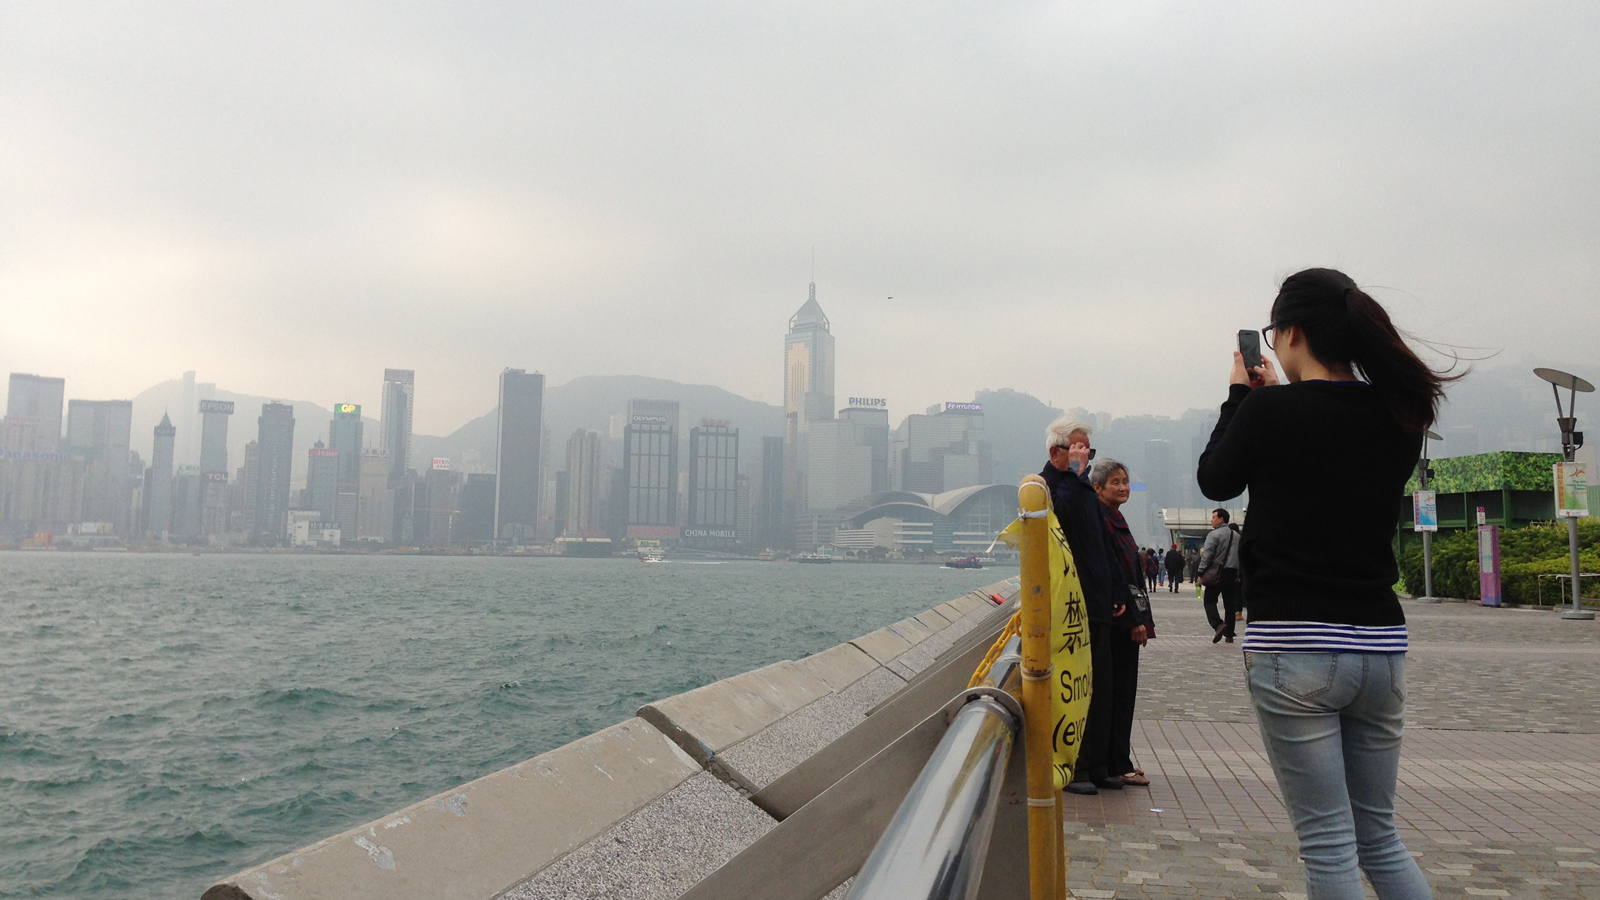 The weather may be foggy, but it hasn't stopped this woman from taking a photo of Hong Kong Island's skyline.